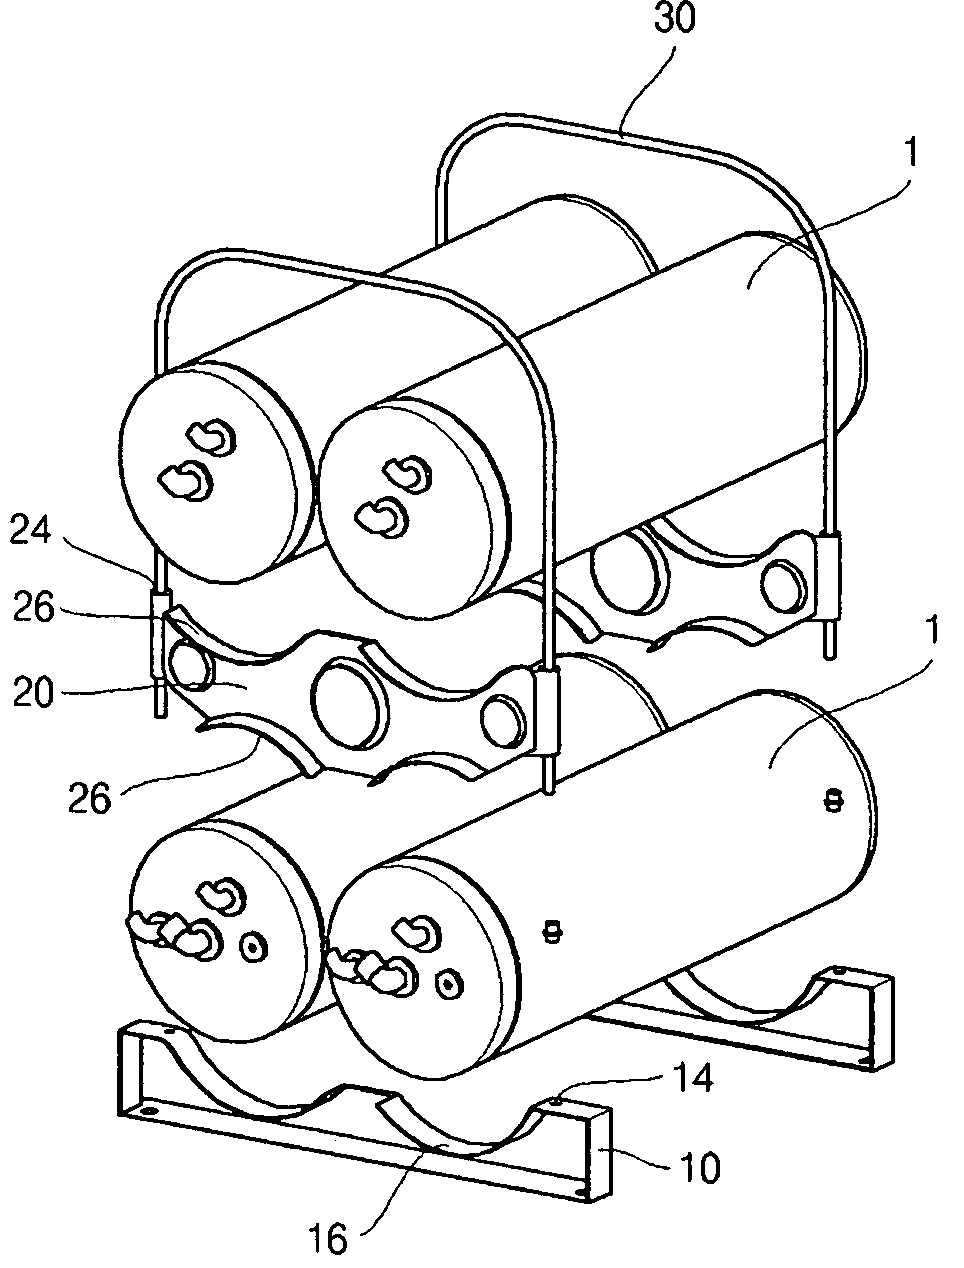 Air tank fixing structure for commercial vehicles